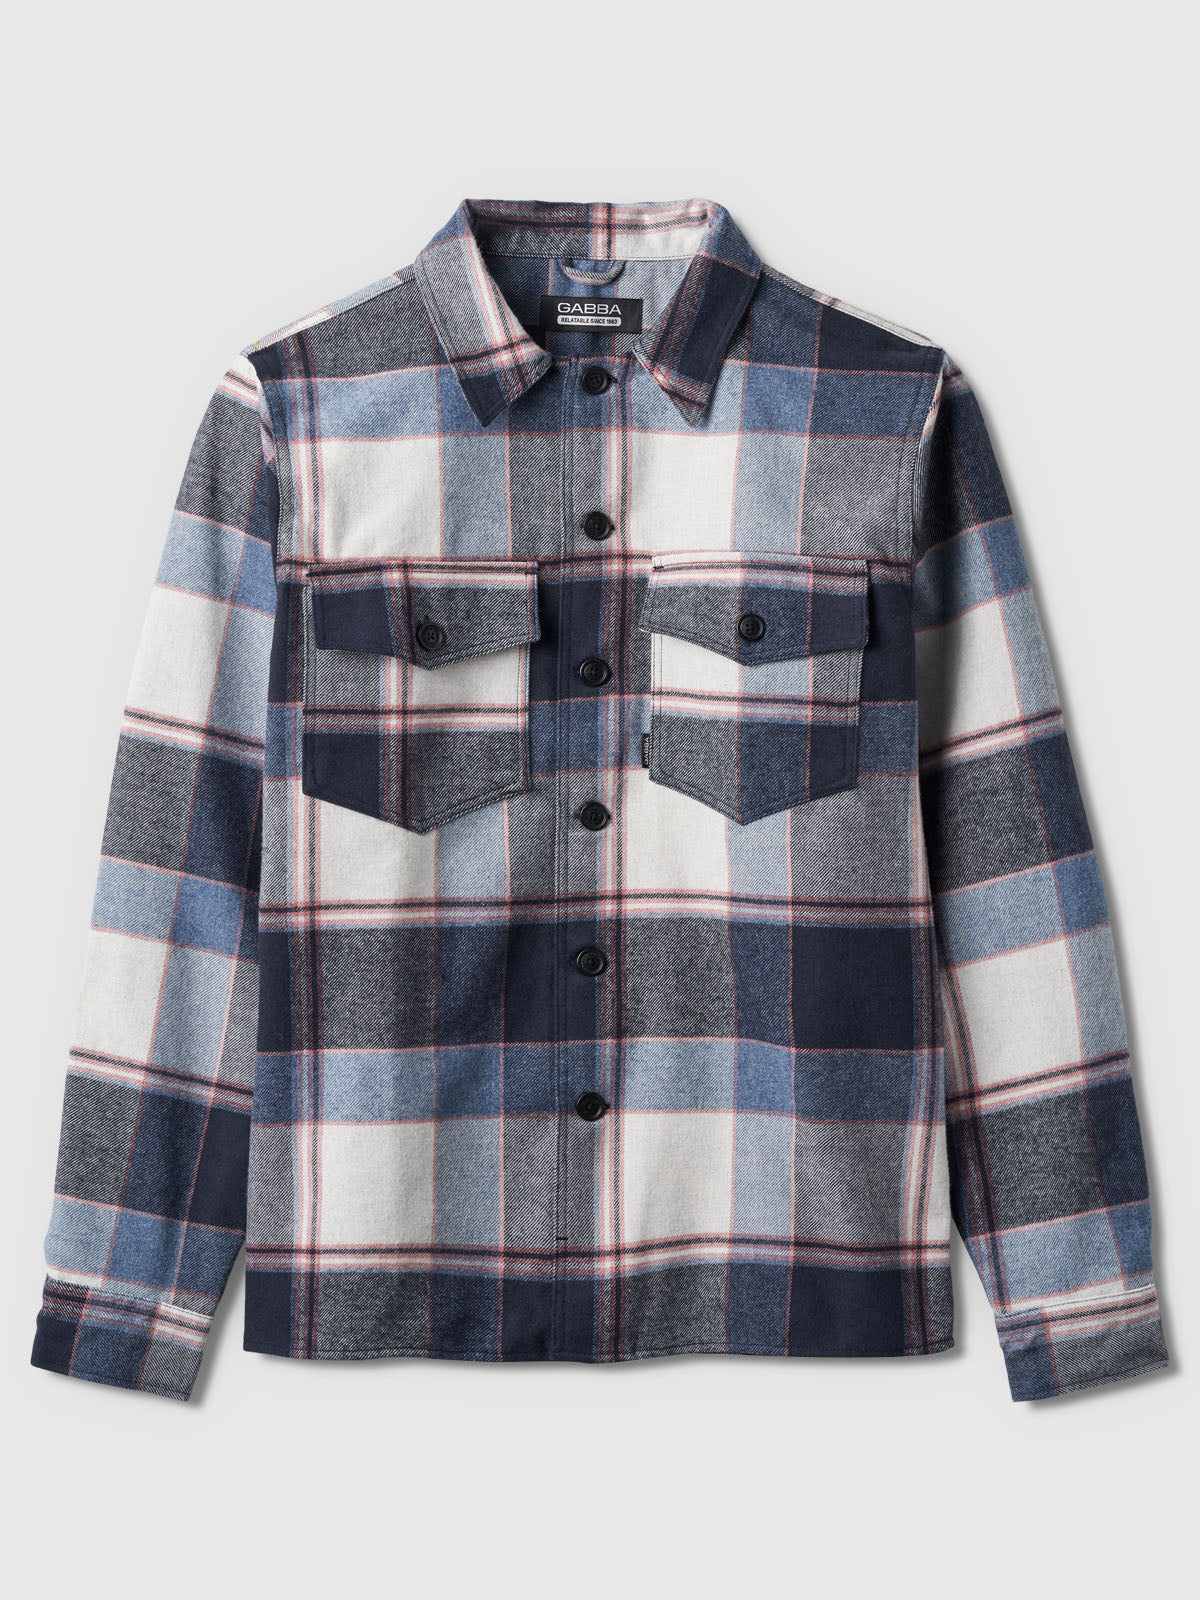 Clipper Big Ny Check - Navy Check - The Sons online